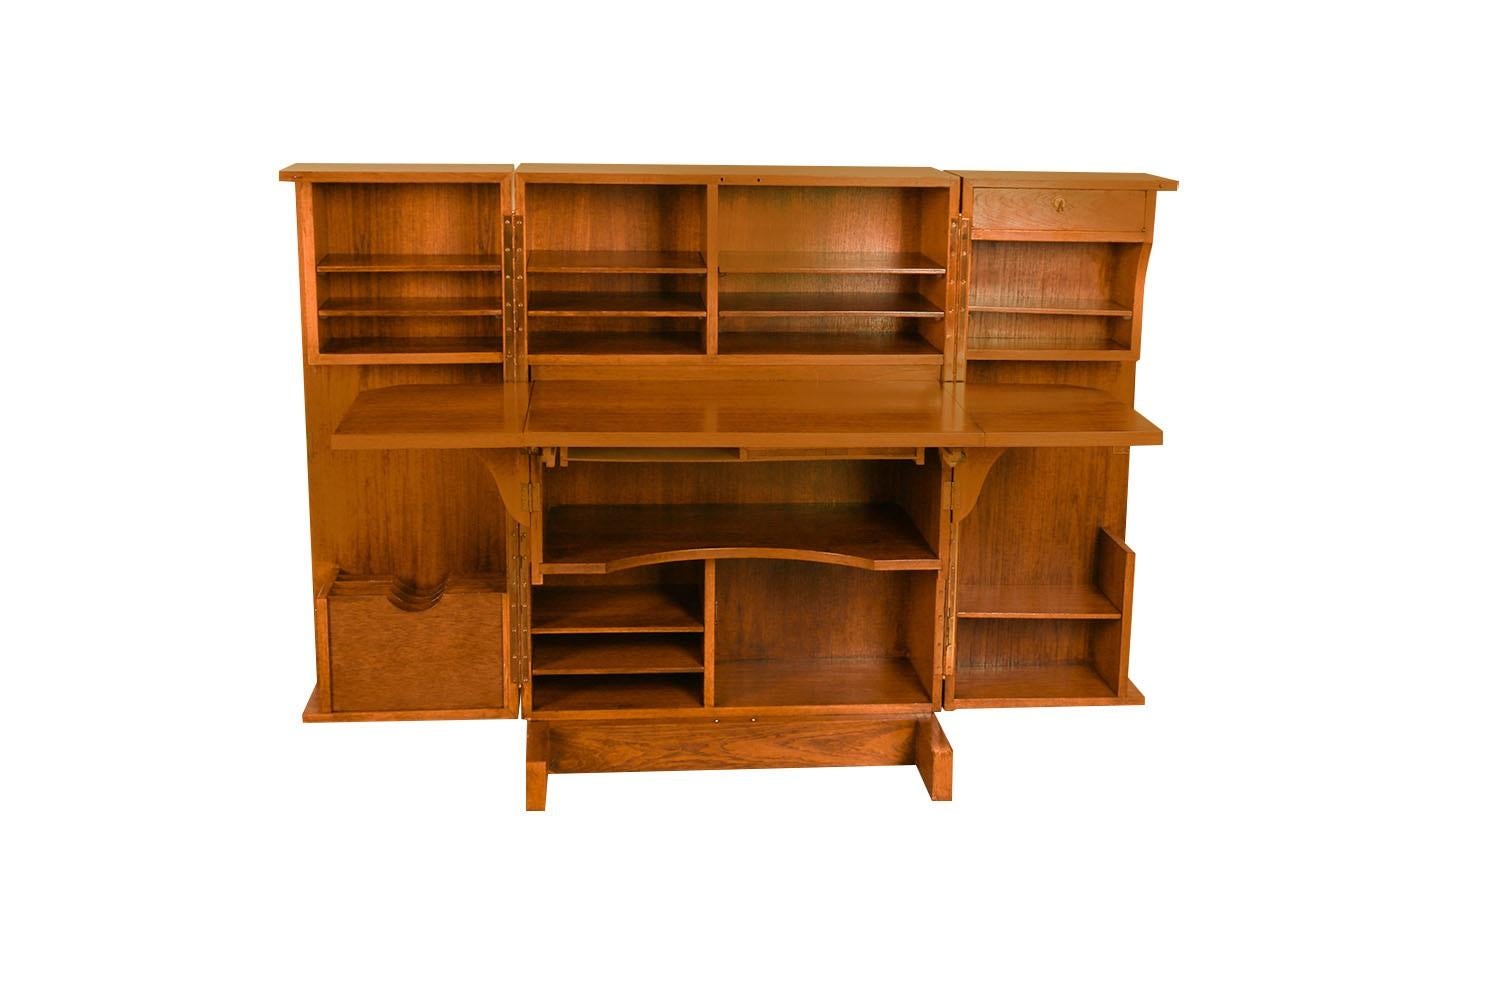 A desk with incredible form and presence. This attractive original magic box desk, cabinet/desk made in Denmark, features a brass hinged double door cabinet that opens up to reveal  an  abundance of storage space and cubbies with adjustable